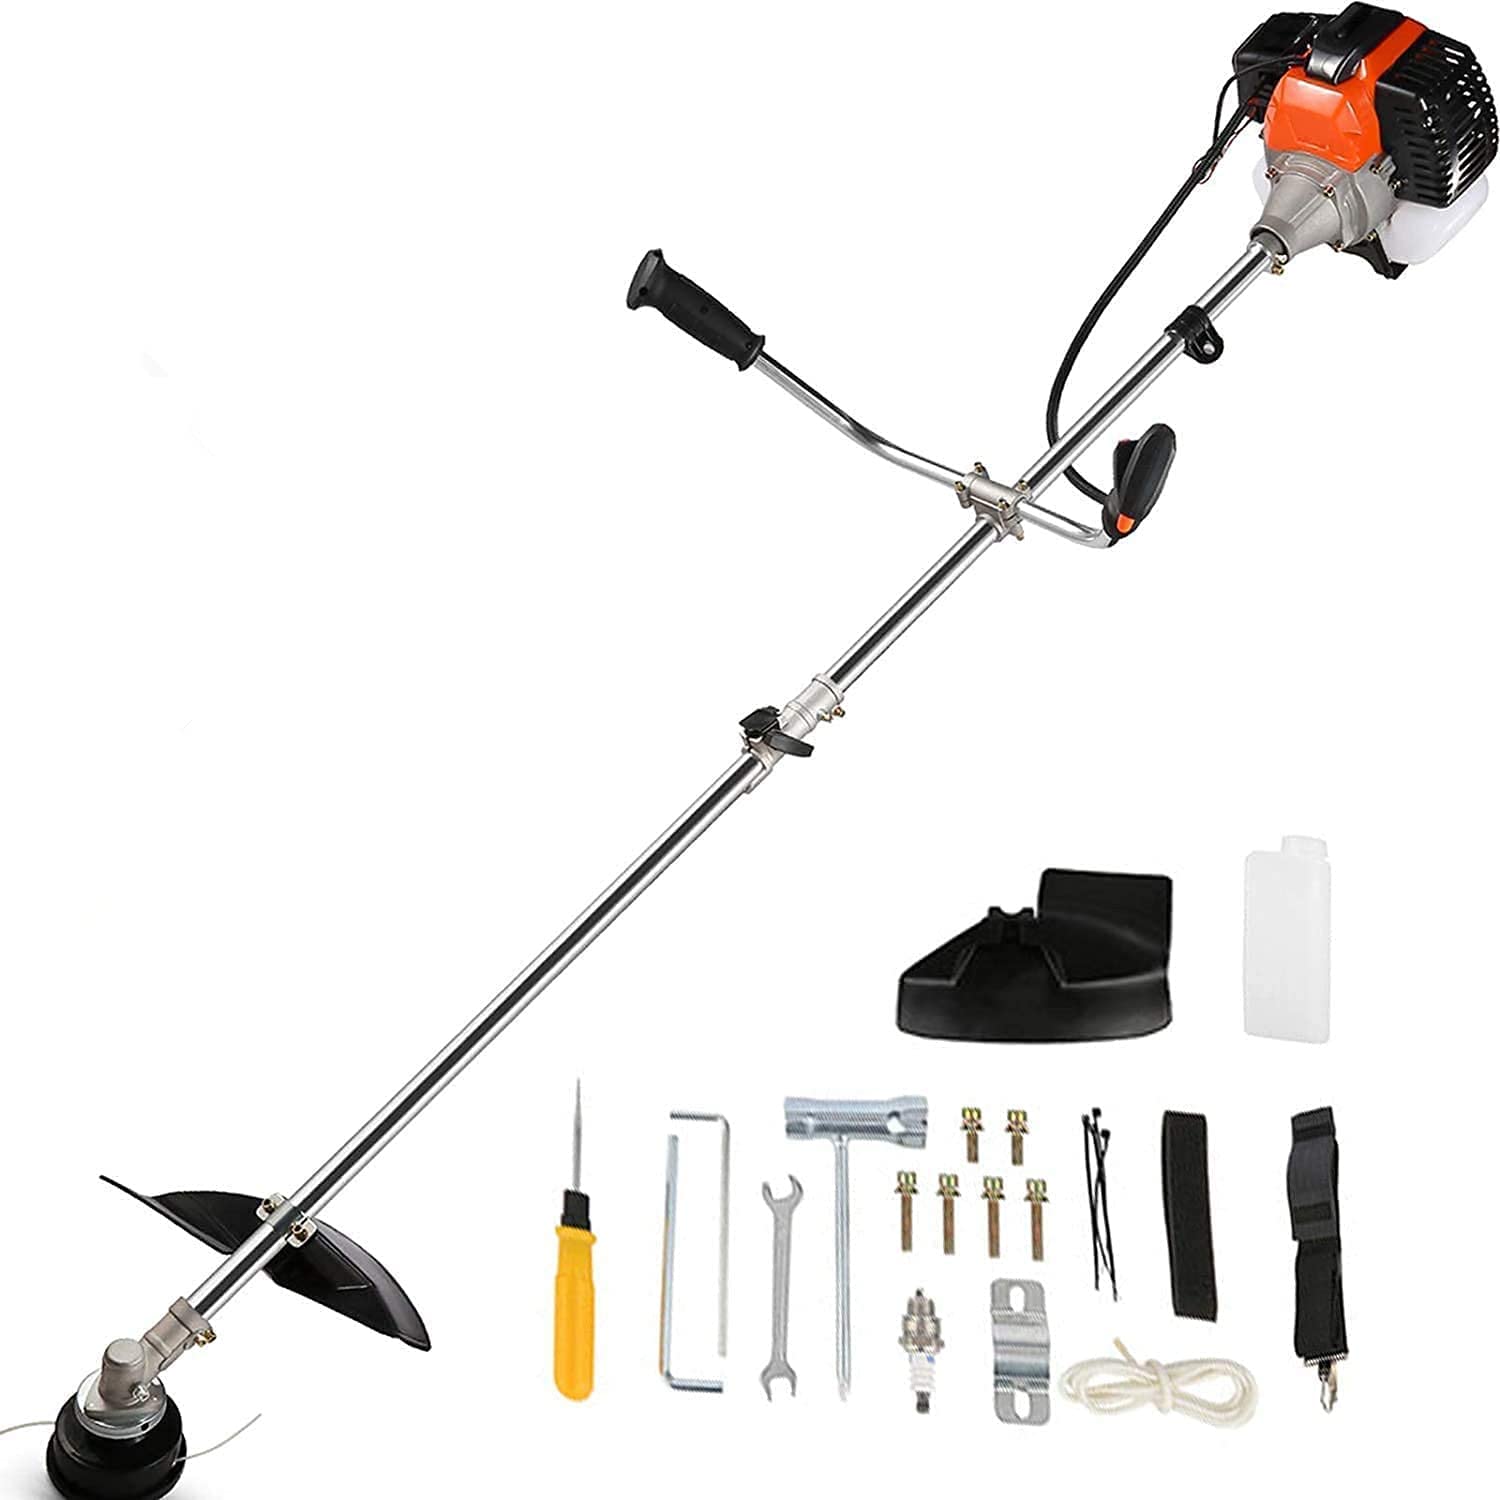 COOCHEER 42.7CC 2-in-1 Gas String Trimmer and Brush Cutter